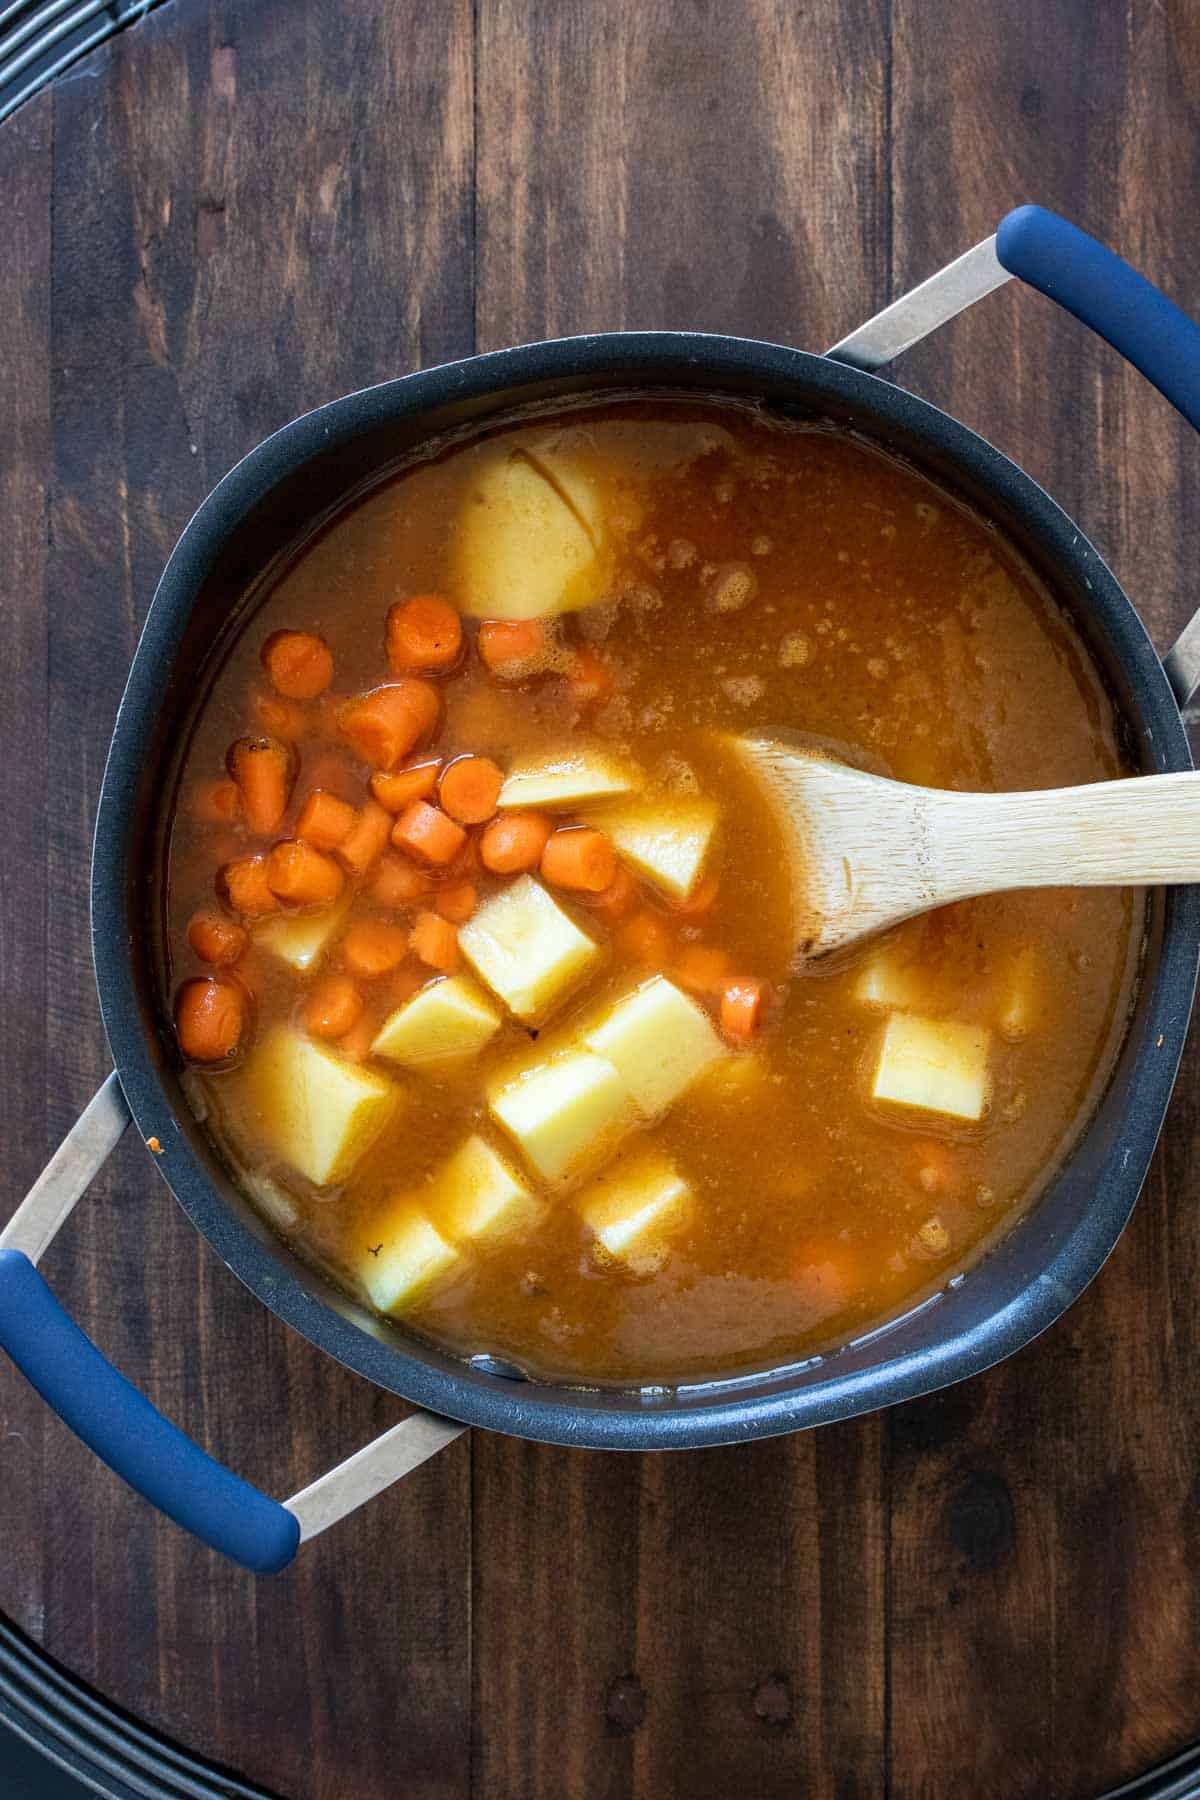 Wooden spoon mixing soup with carrots and potatoes